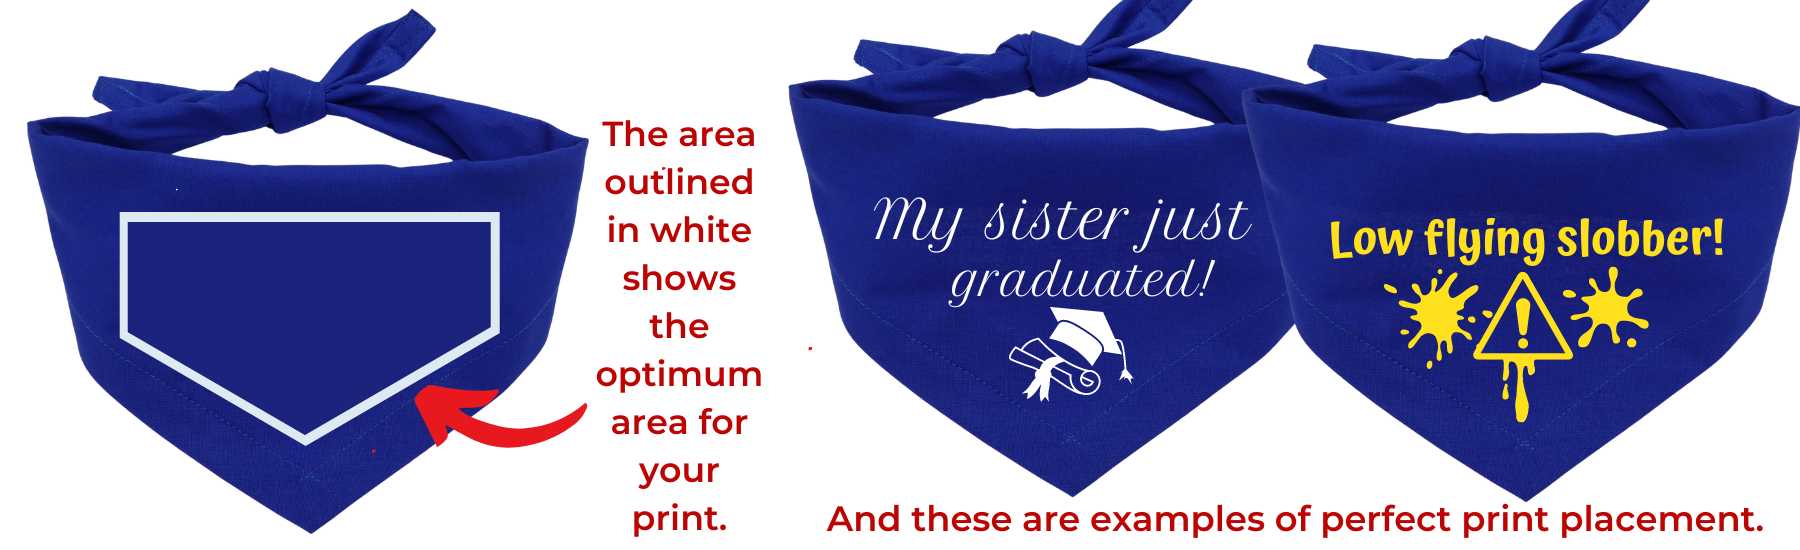 how to design your custom printed dog bandana-tips on placement of text and image